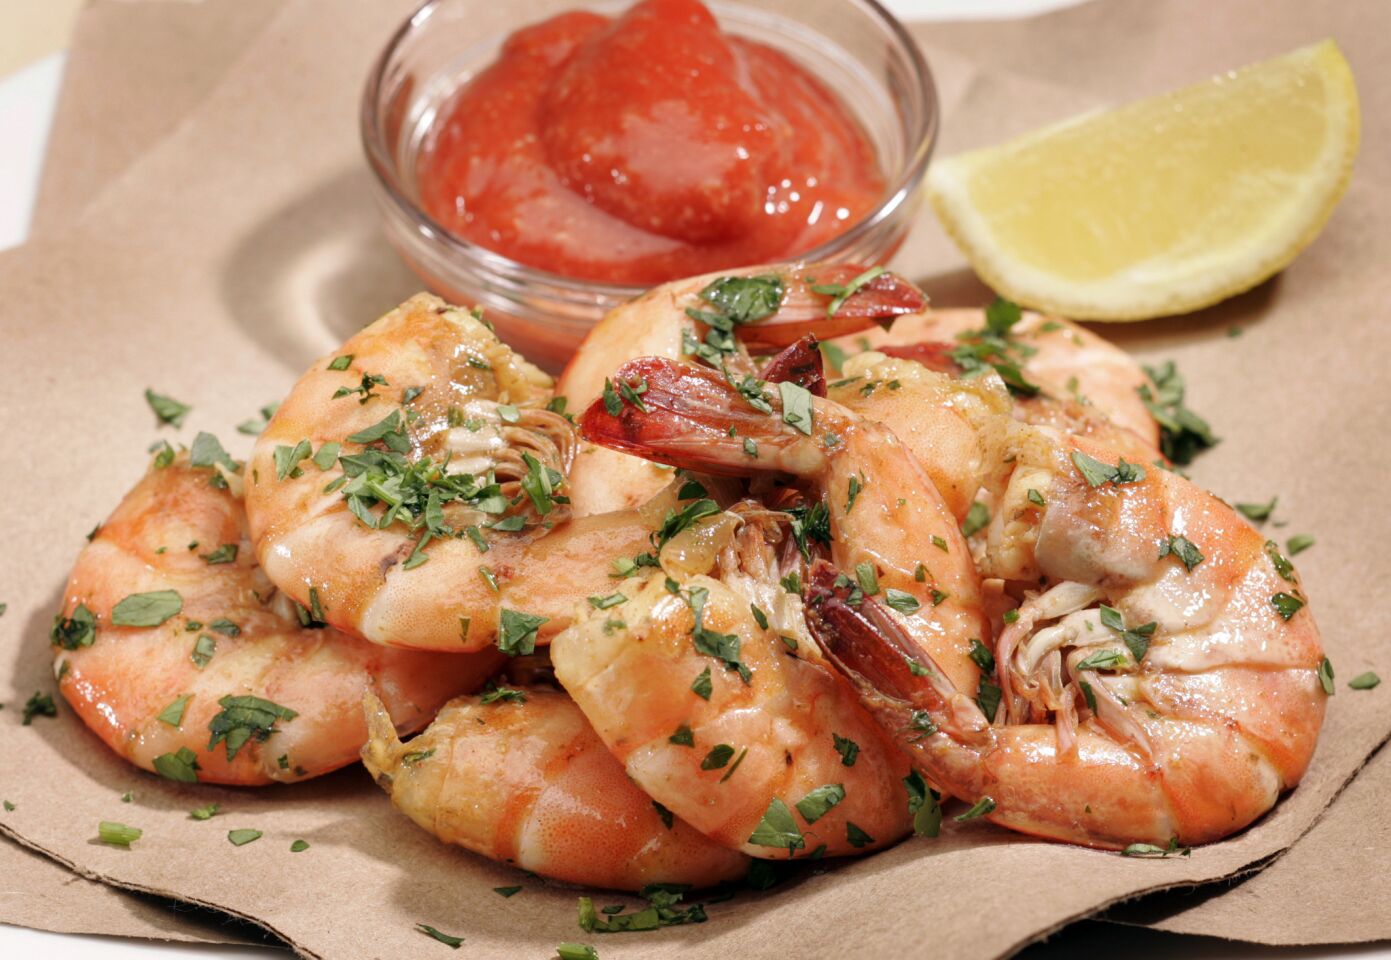 If you don't mind getting your hands dirty at dinner, you can't go wrong with the peel 'n' eat shrimp recipe David Lentz of The Hungry Cat shared with us.